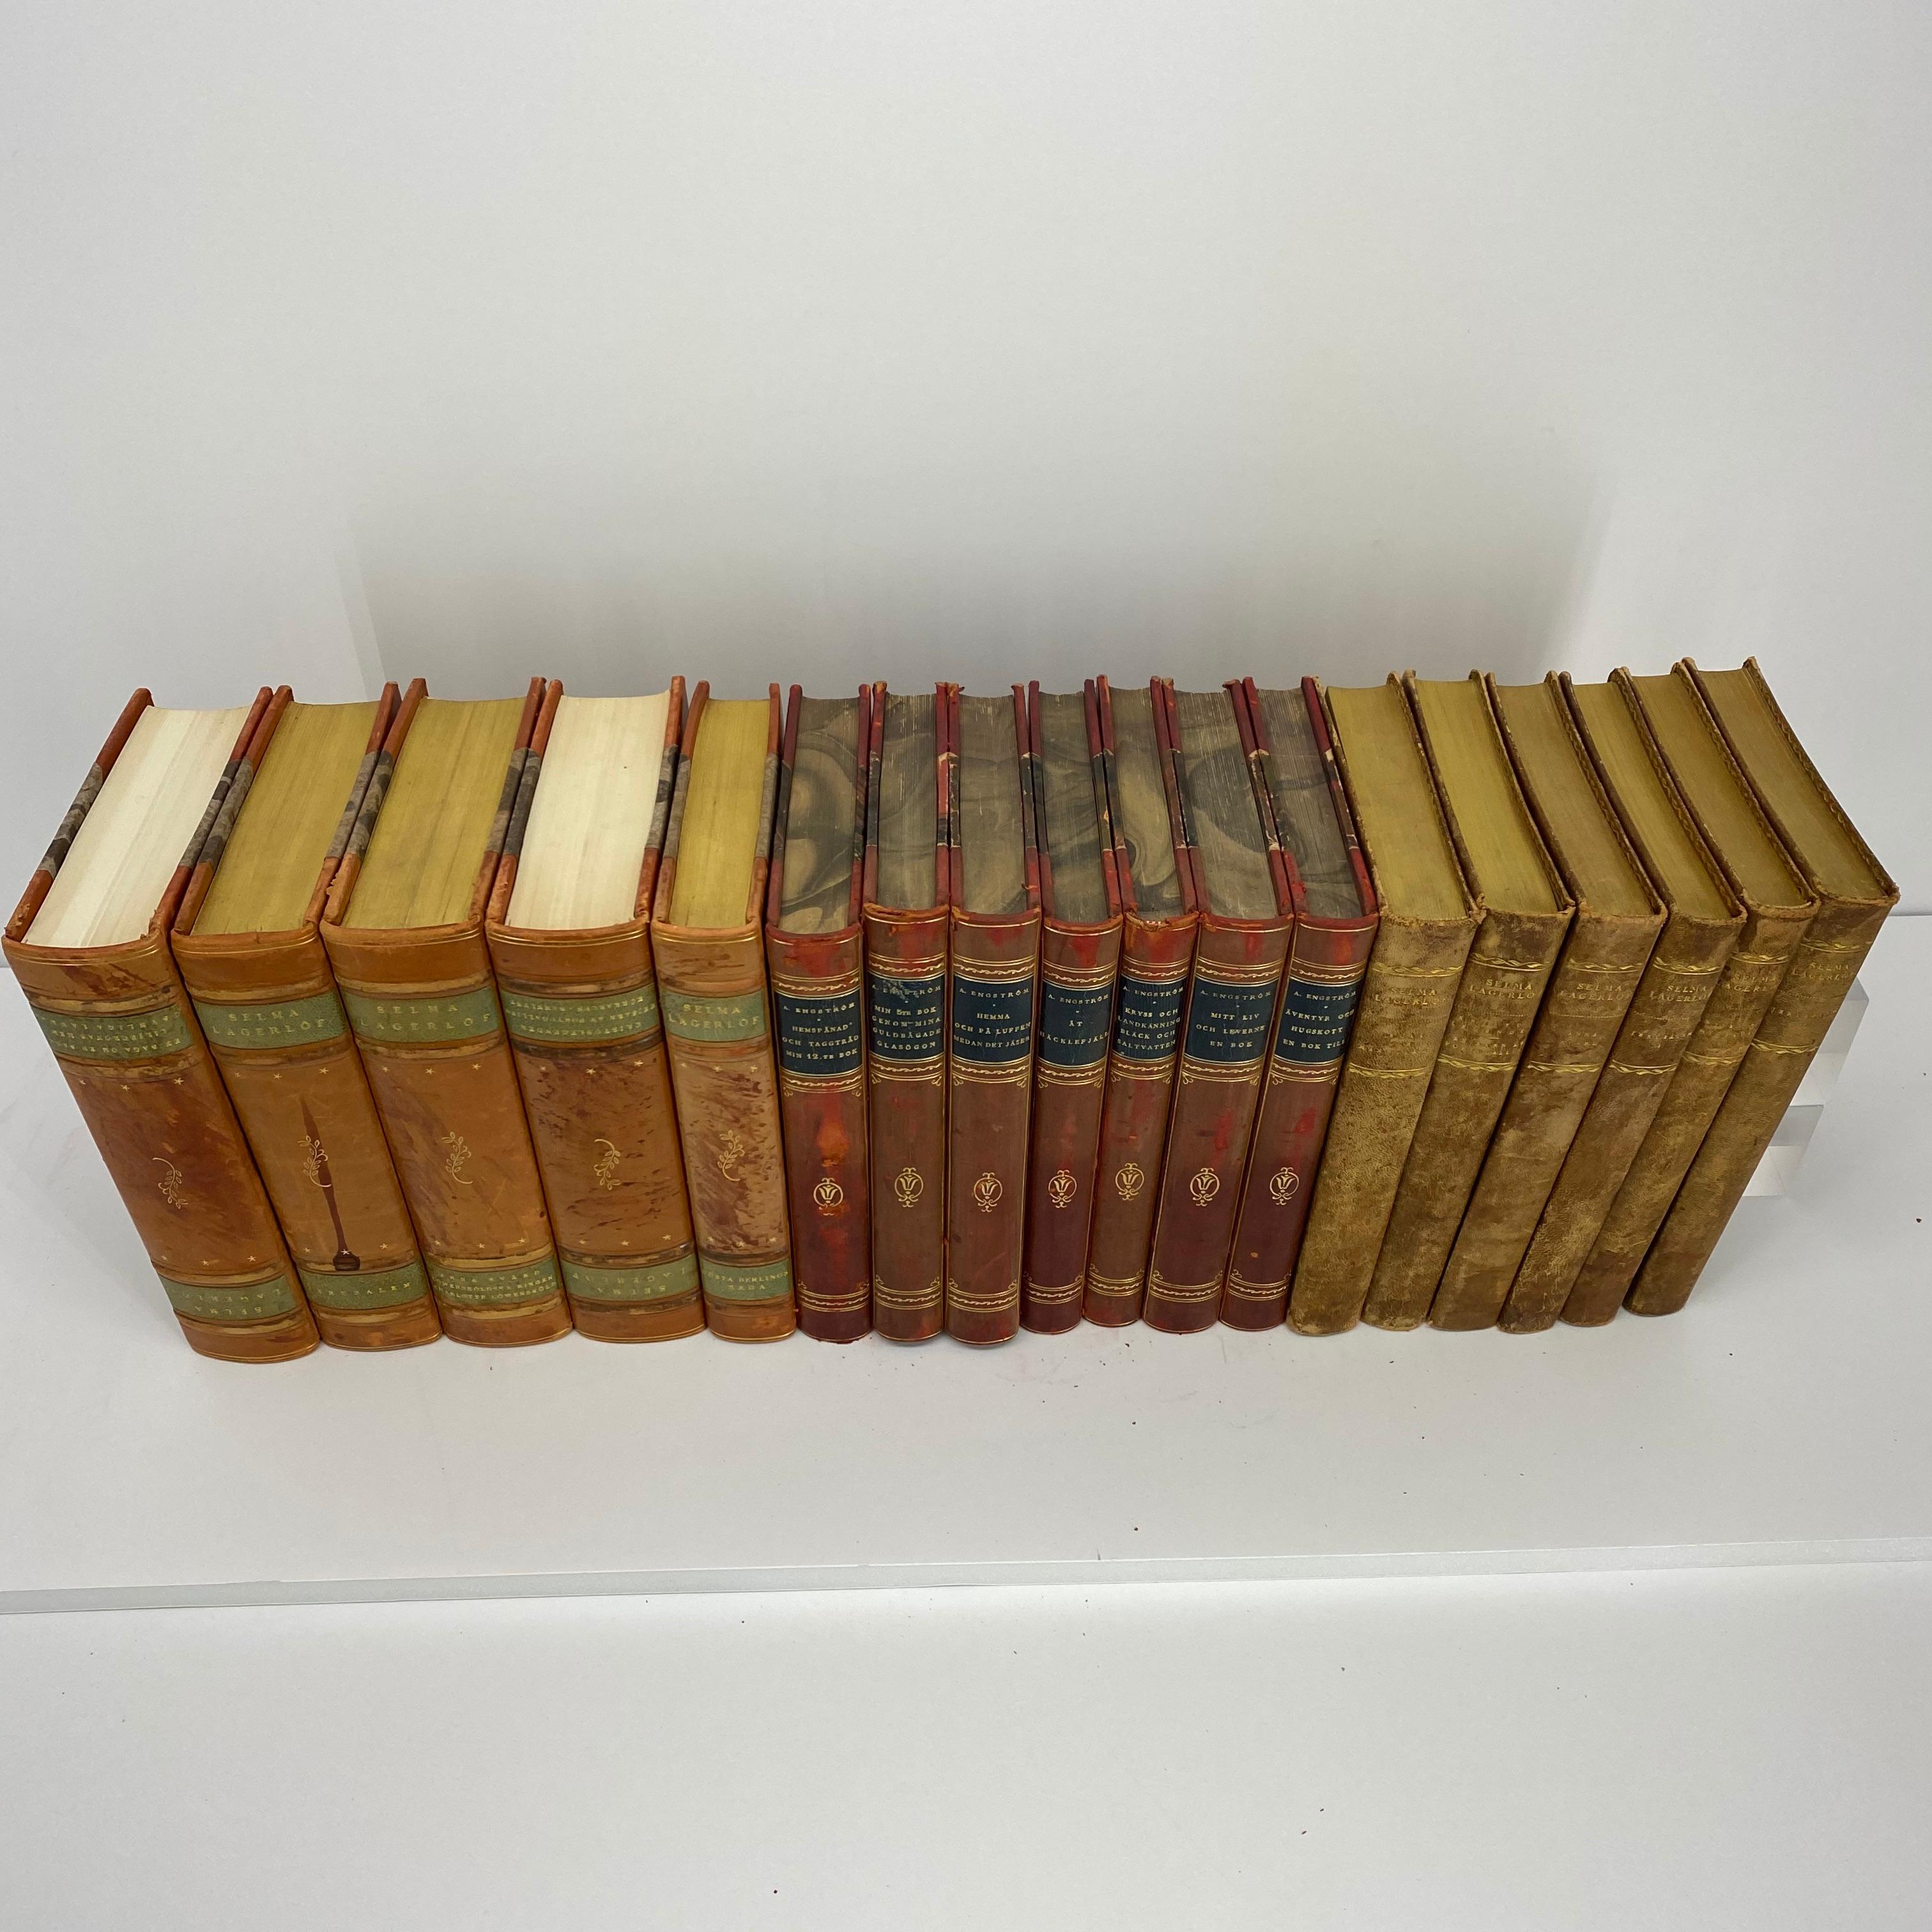 Two feet of 18 Swedish vintage leather backed books from the early 20th Century

The 18 books are 3 sets of Swedish books with complimentary shipping included

Please note that we have thousands of books in inventory that we can be custom delivered